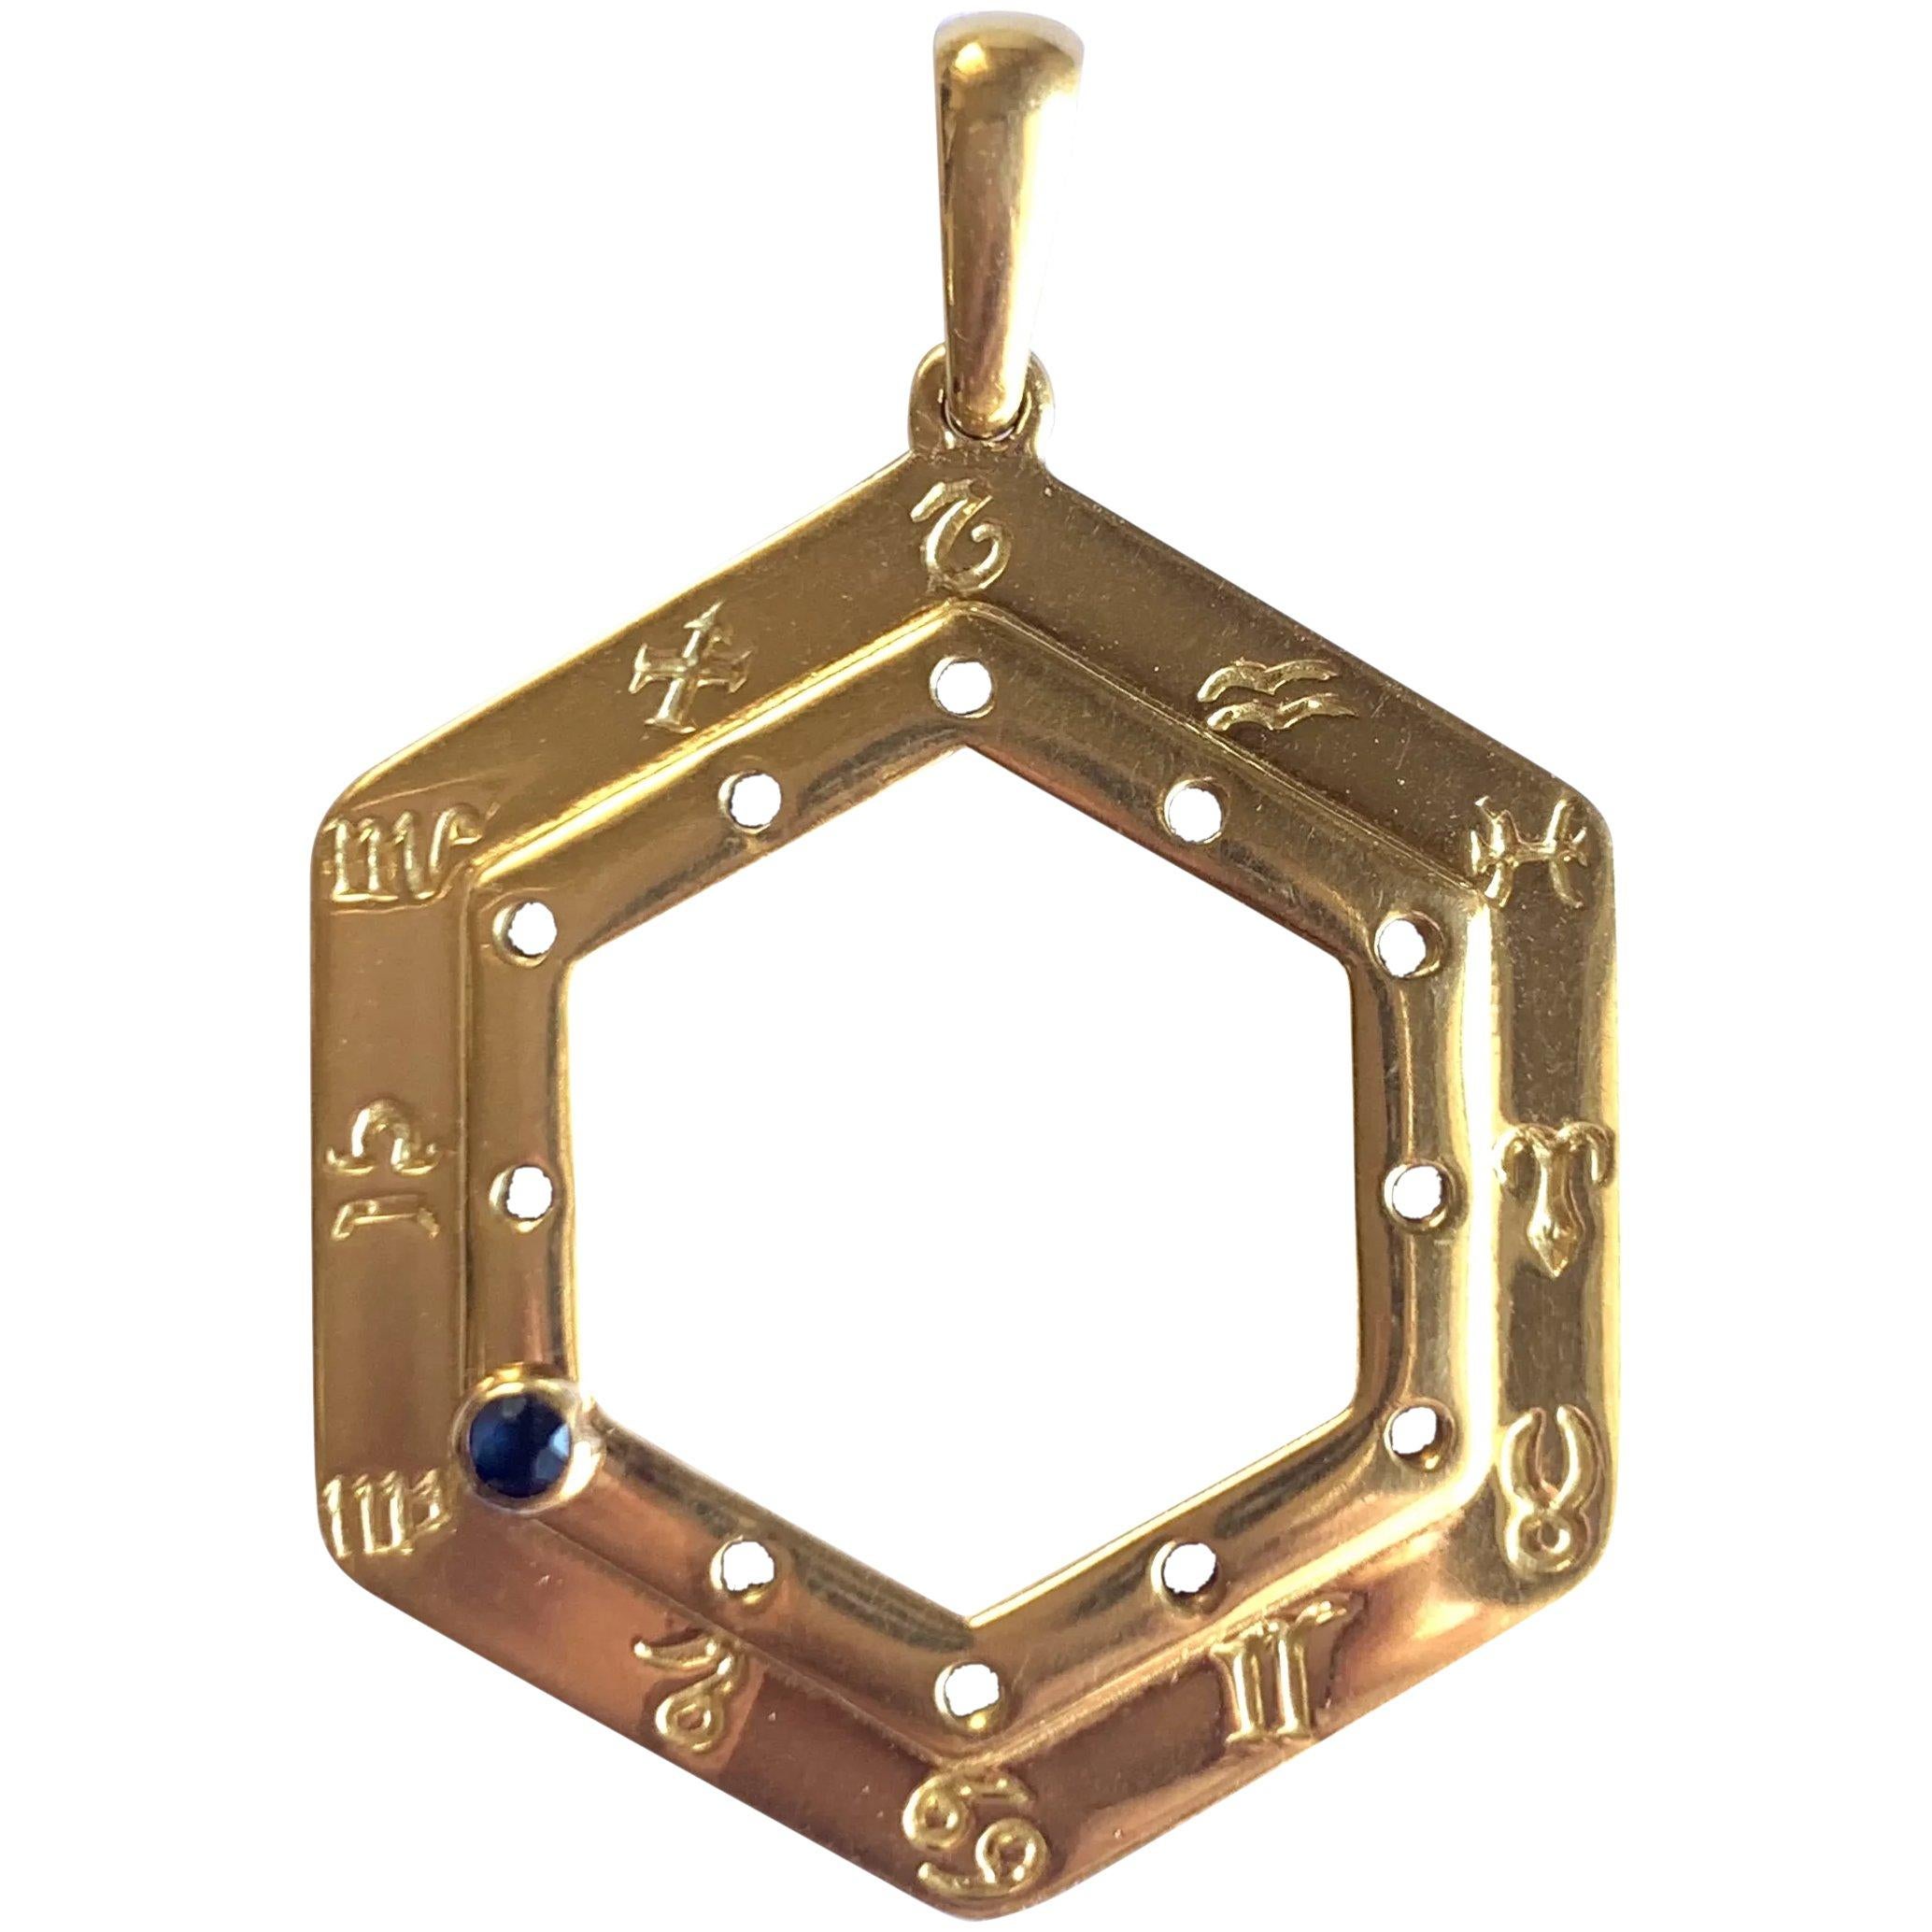 Cartier Vintage Zodiac Sapphire Yellow Gold Pendant Necklace

A fabulous vintage Cartier zodiac pendant, the pendant showcases all 12 zodiac signs and has sapphire screw which can be placed on your zodiac sign of choice.
The pendant is crafted in